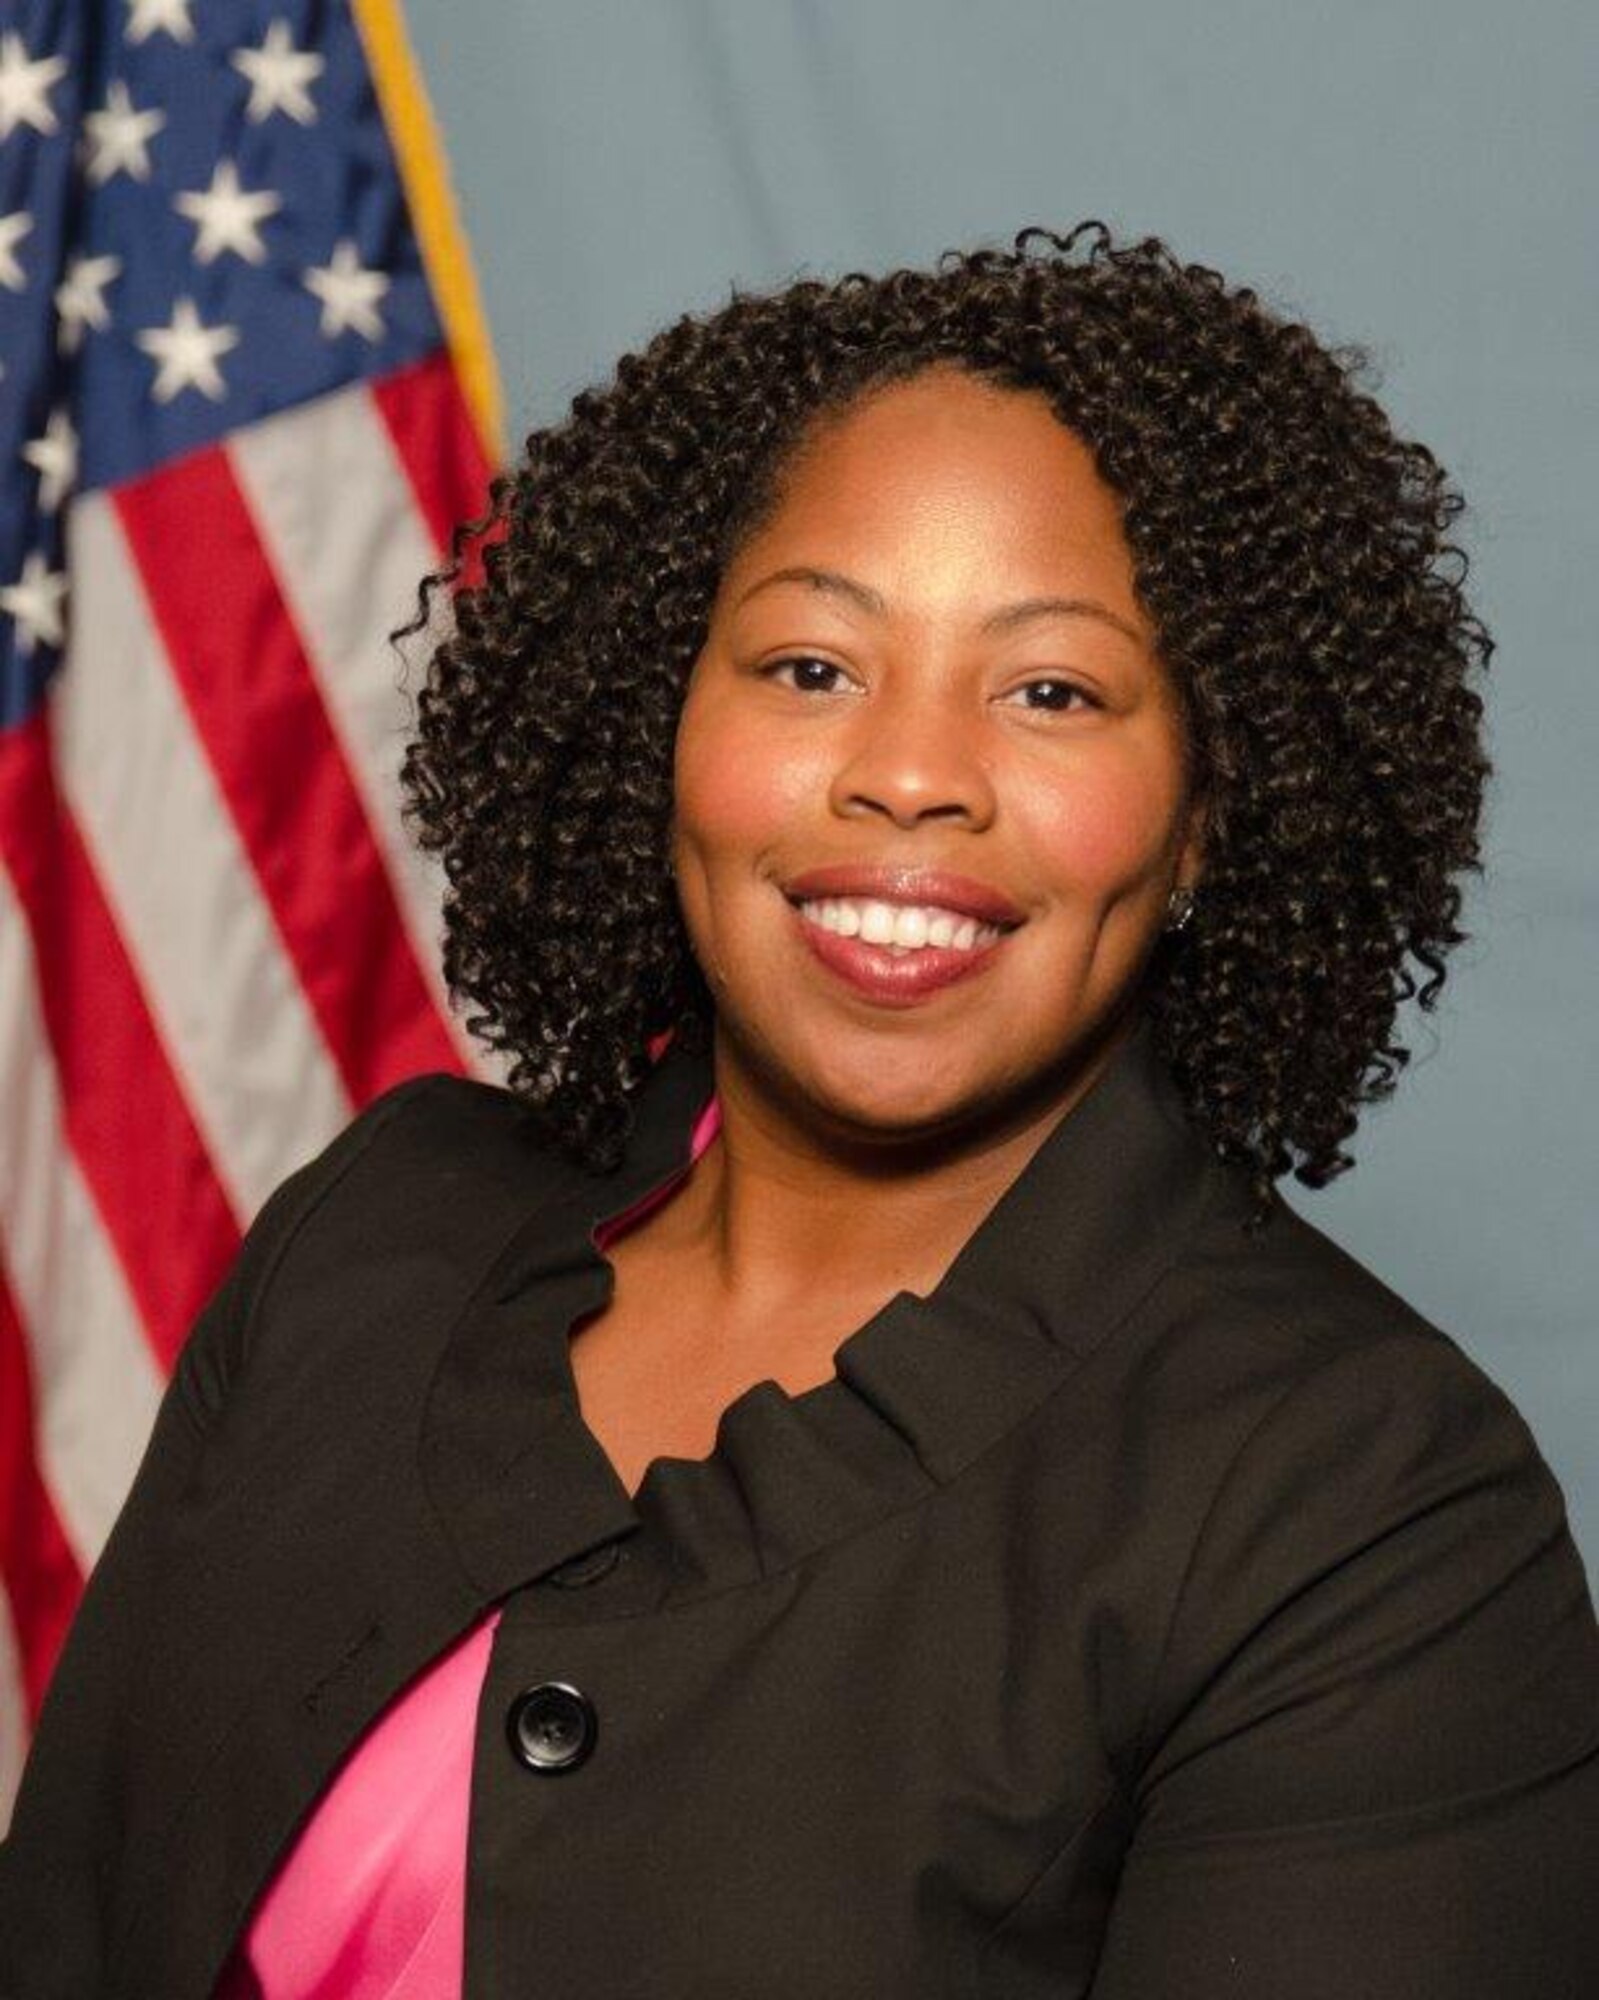 Anissa Lumpkin is the Air Force Research Laboratory SBIR/STTR Program Lead. In her role, Lumpkin oversees the STTR portfolio of topics and is leading a variety of new initiatives to improve the program’s return on investment. (Courtesy photo)